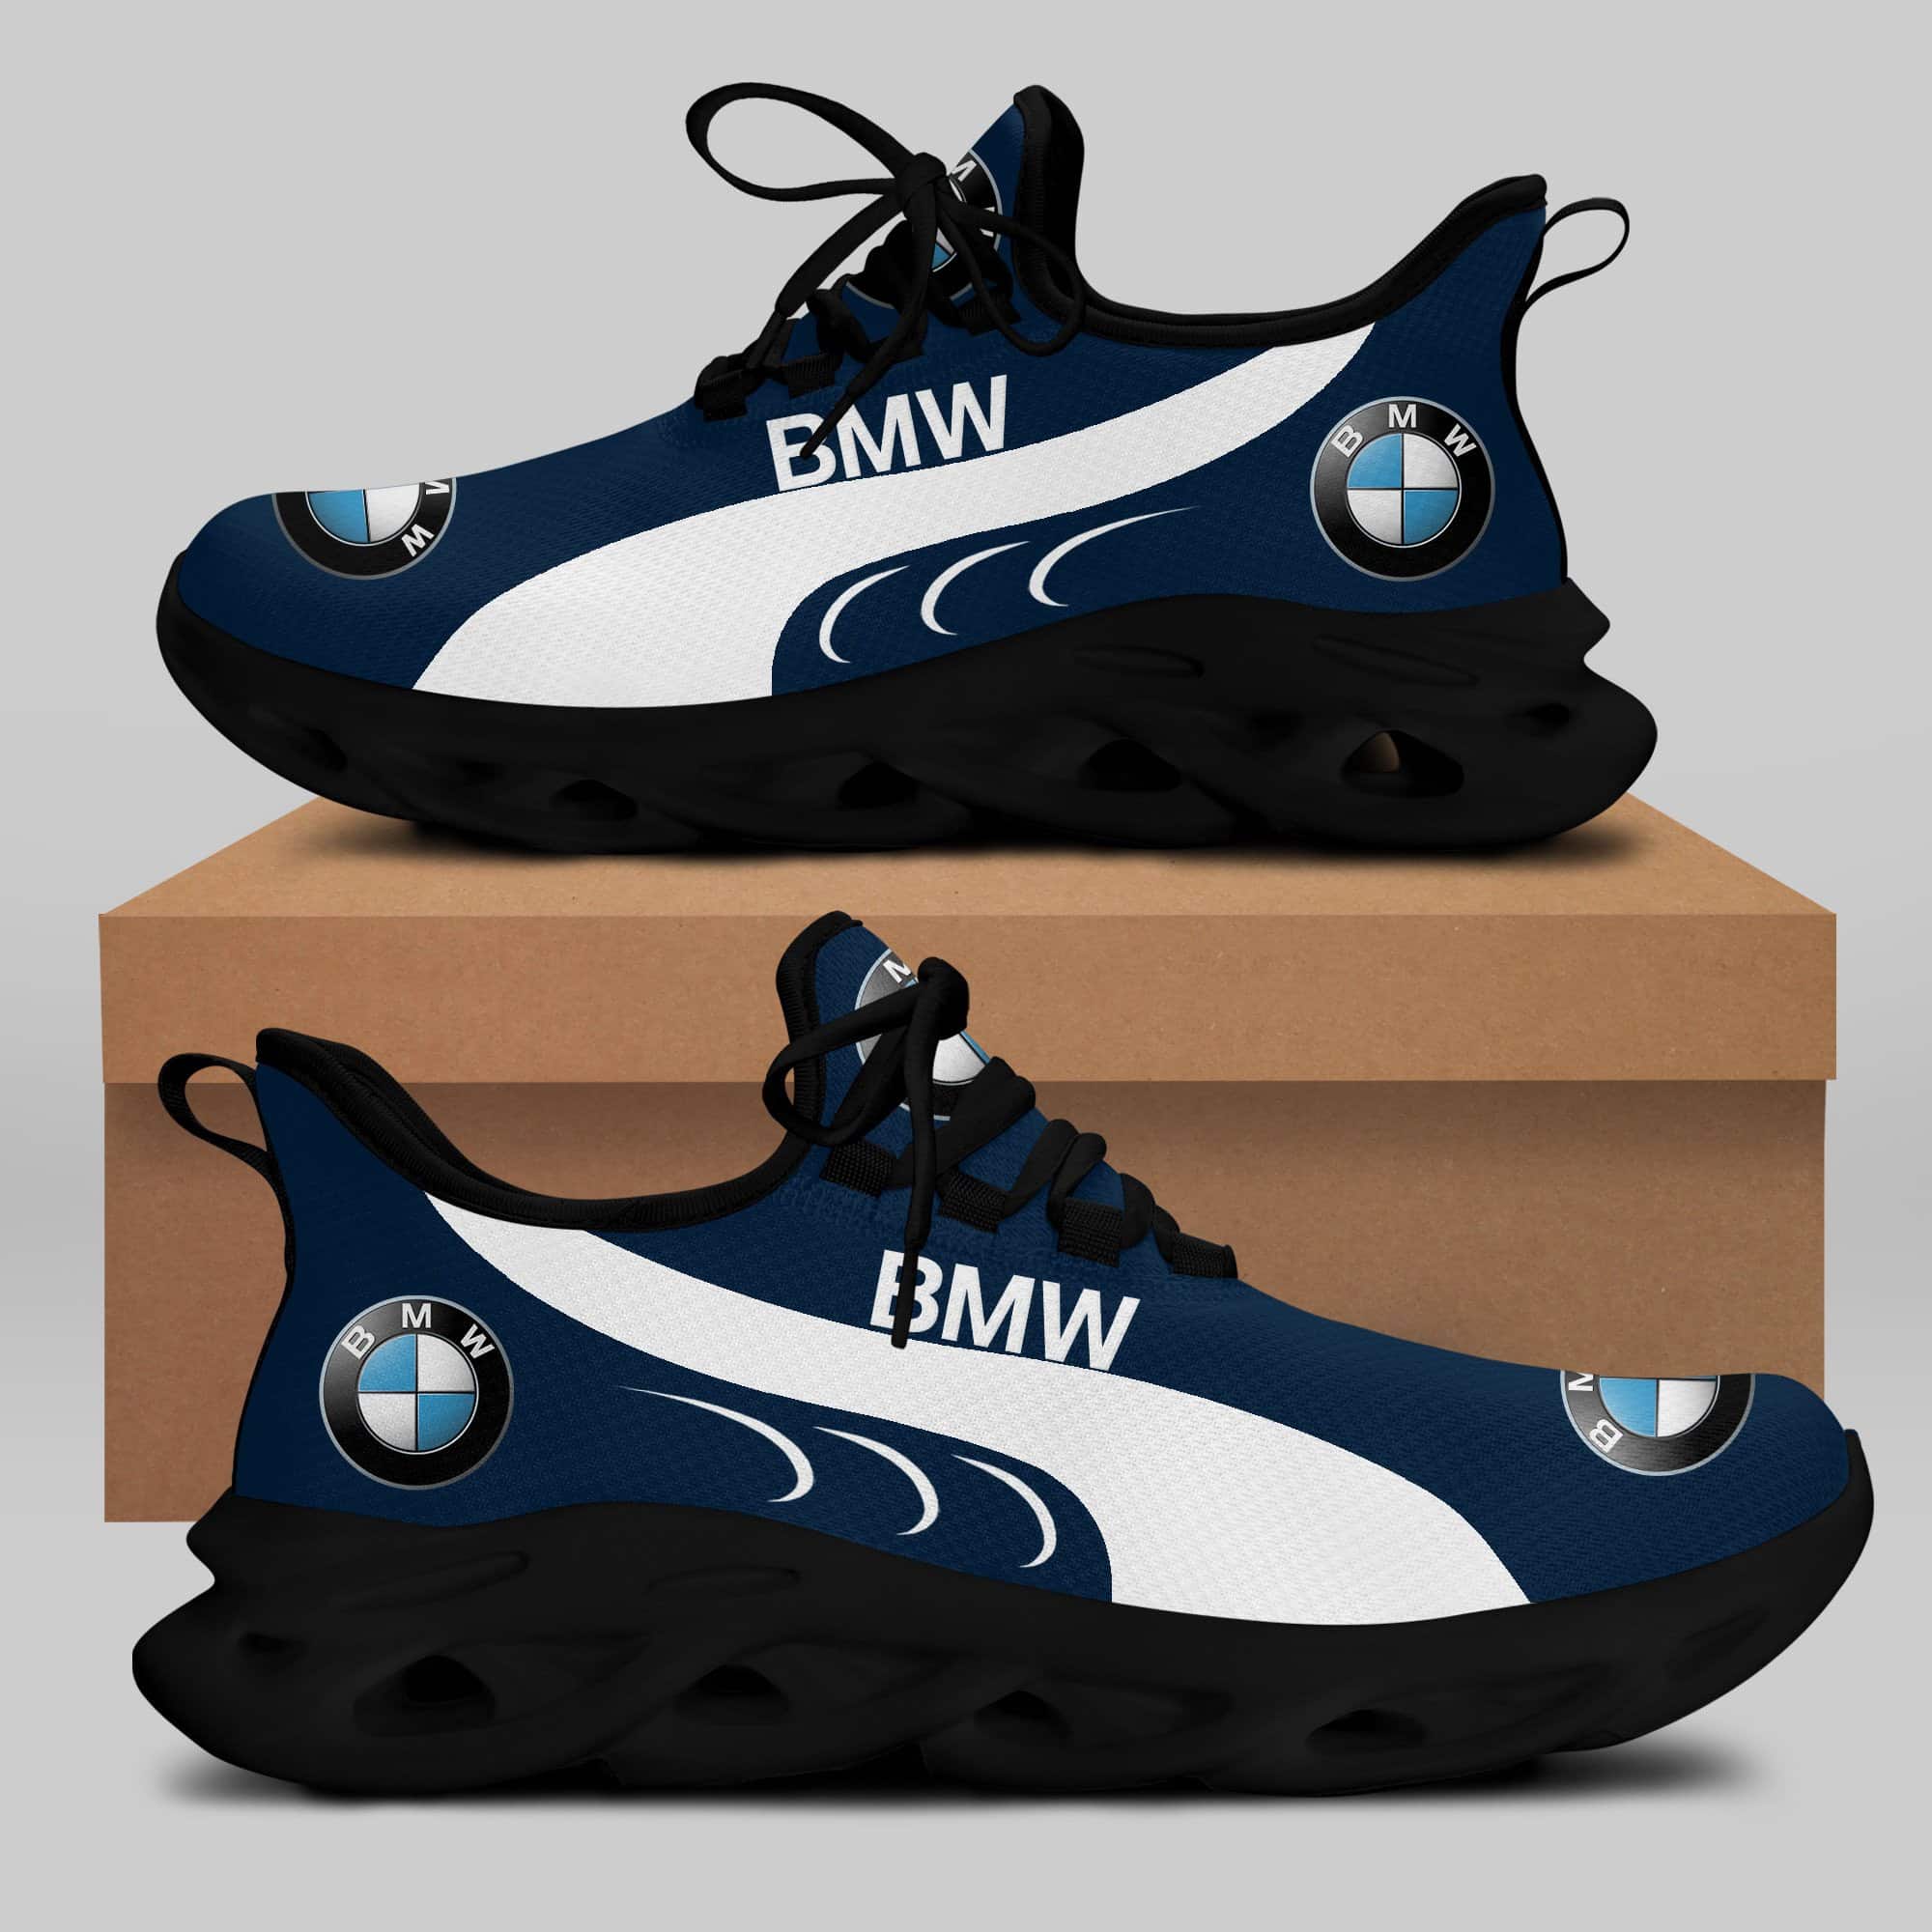 Bmw Running Shoes Max Soul Shoes Sneakers Ver 48 1